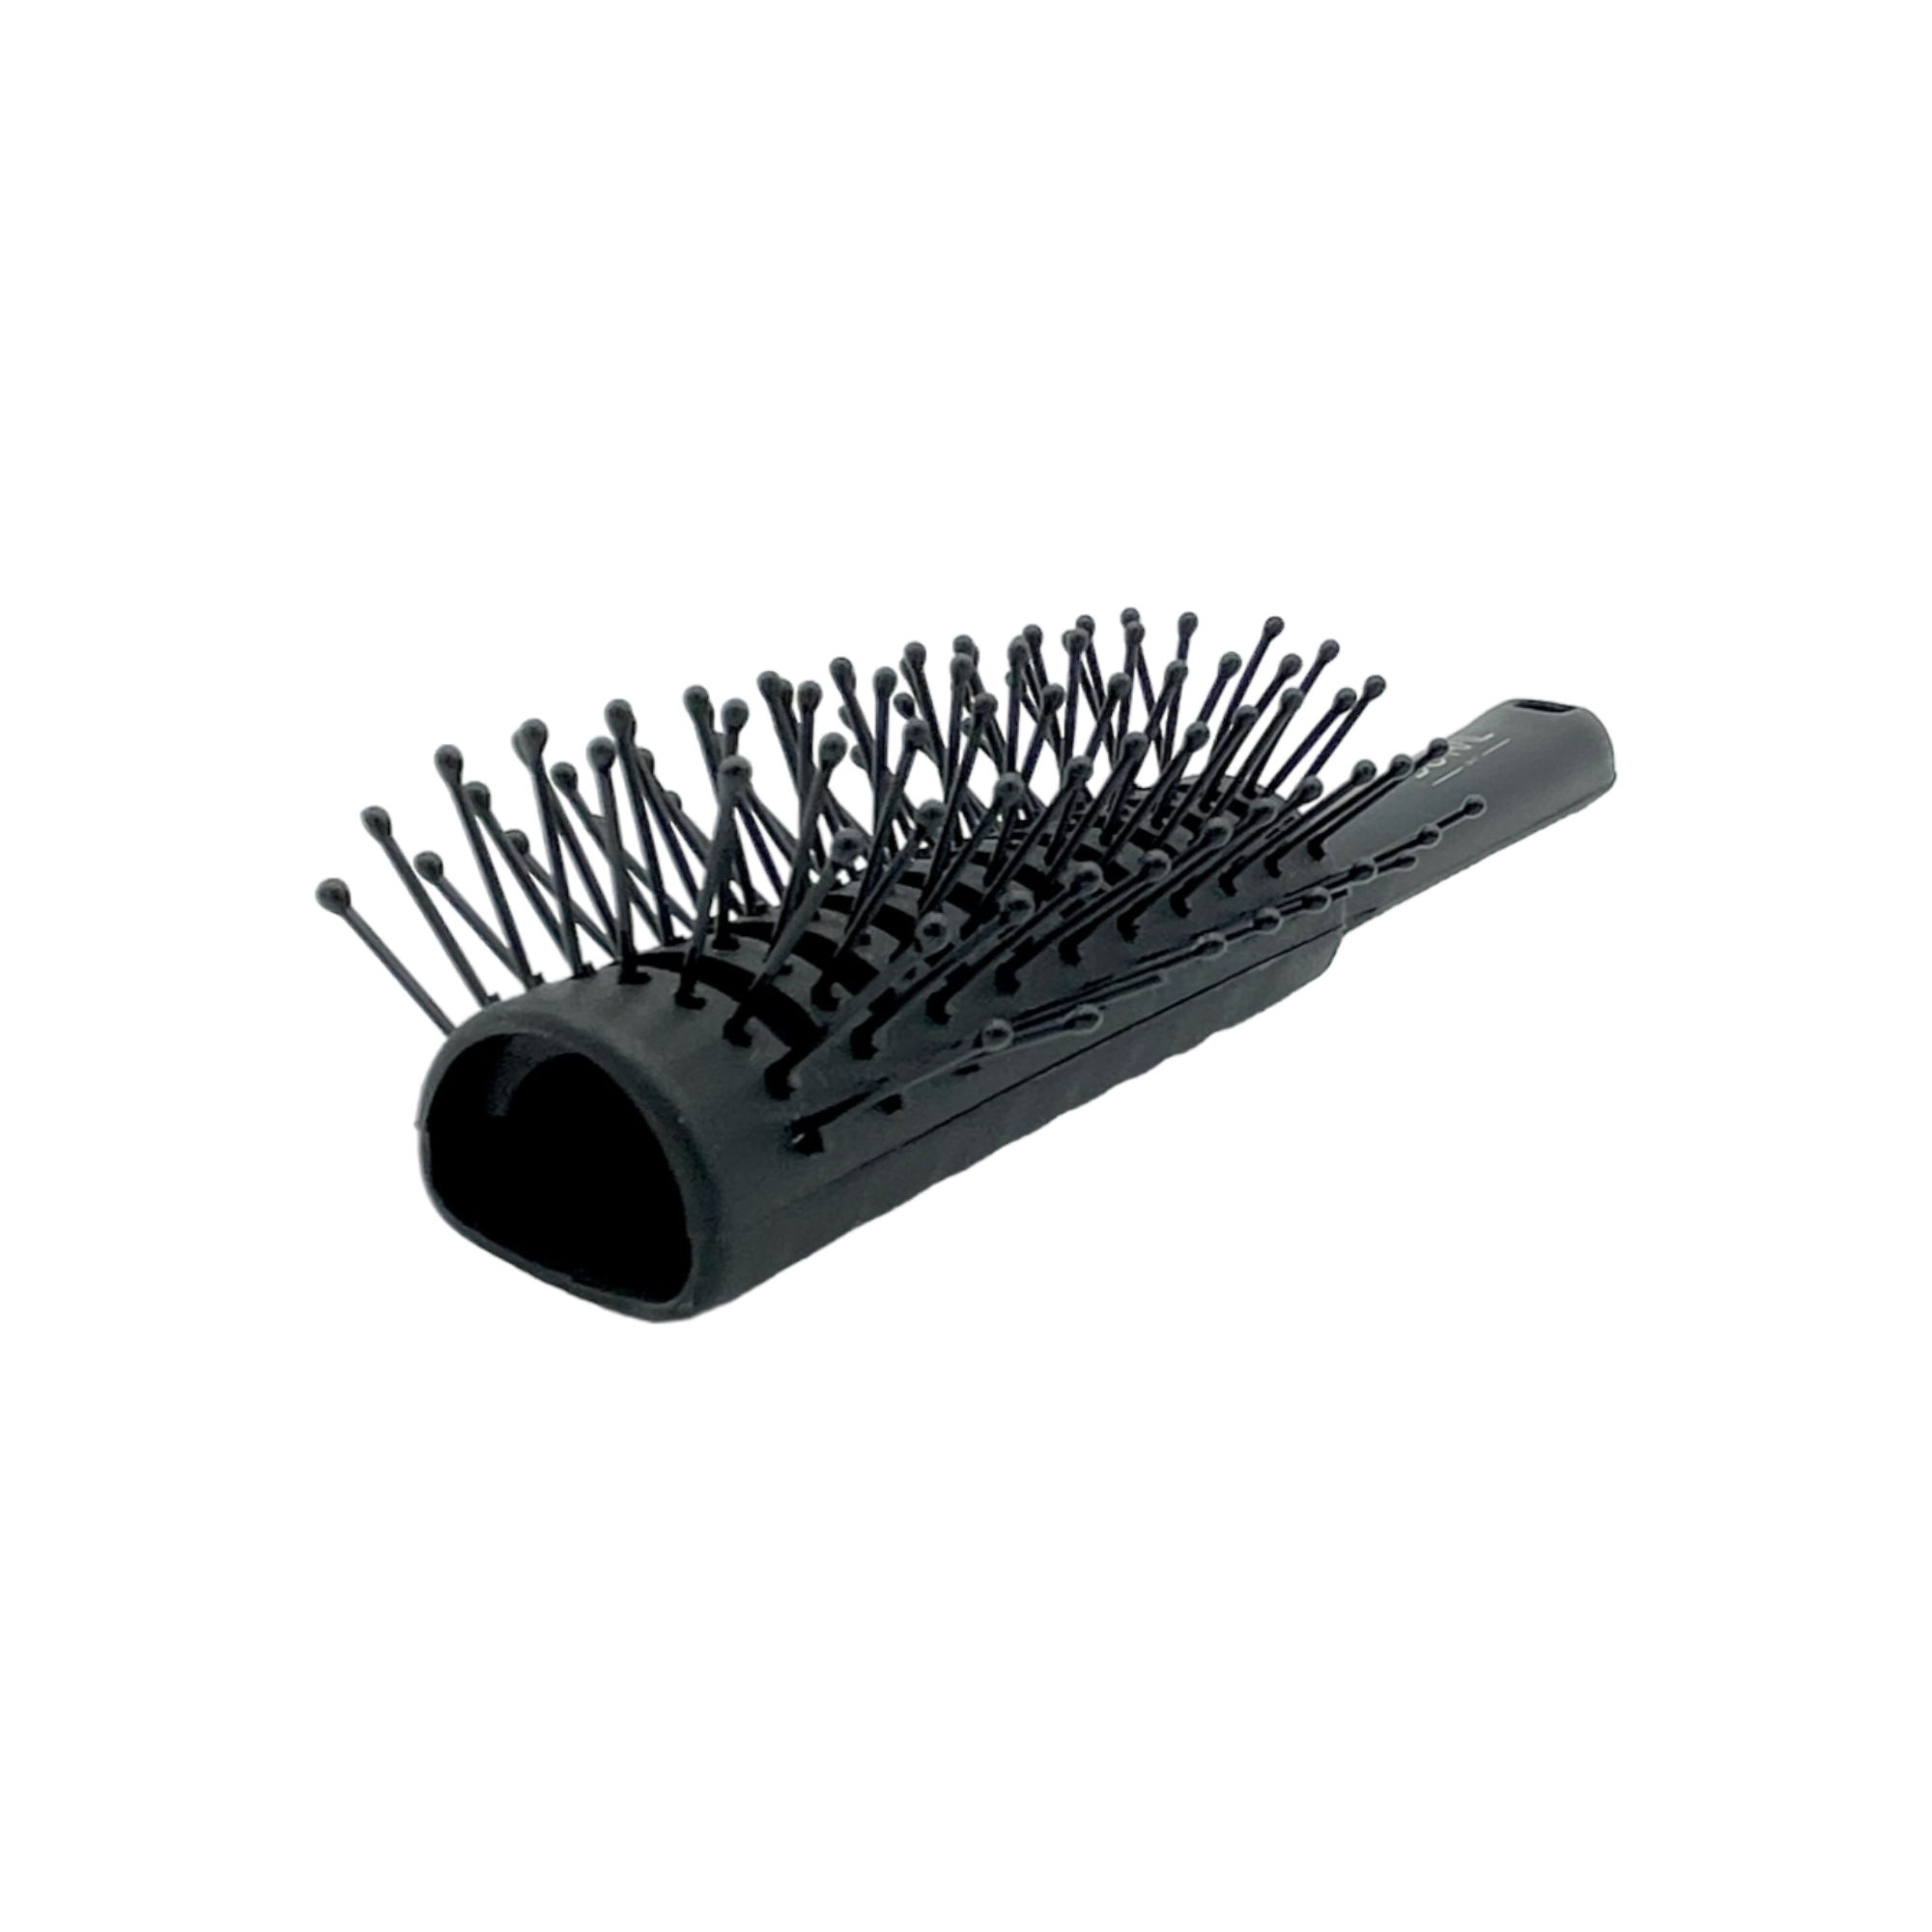 Dural plastic tunnel brush with nylon pins and ball tips